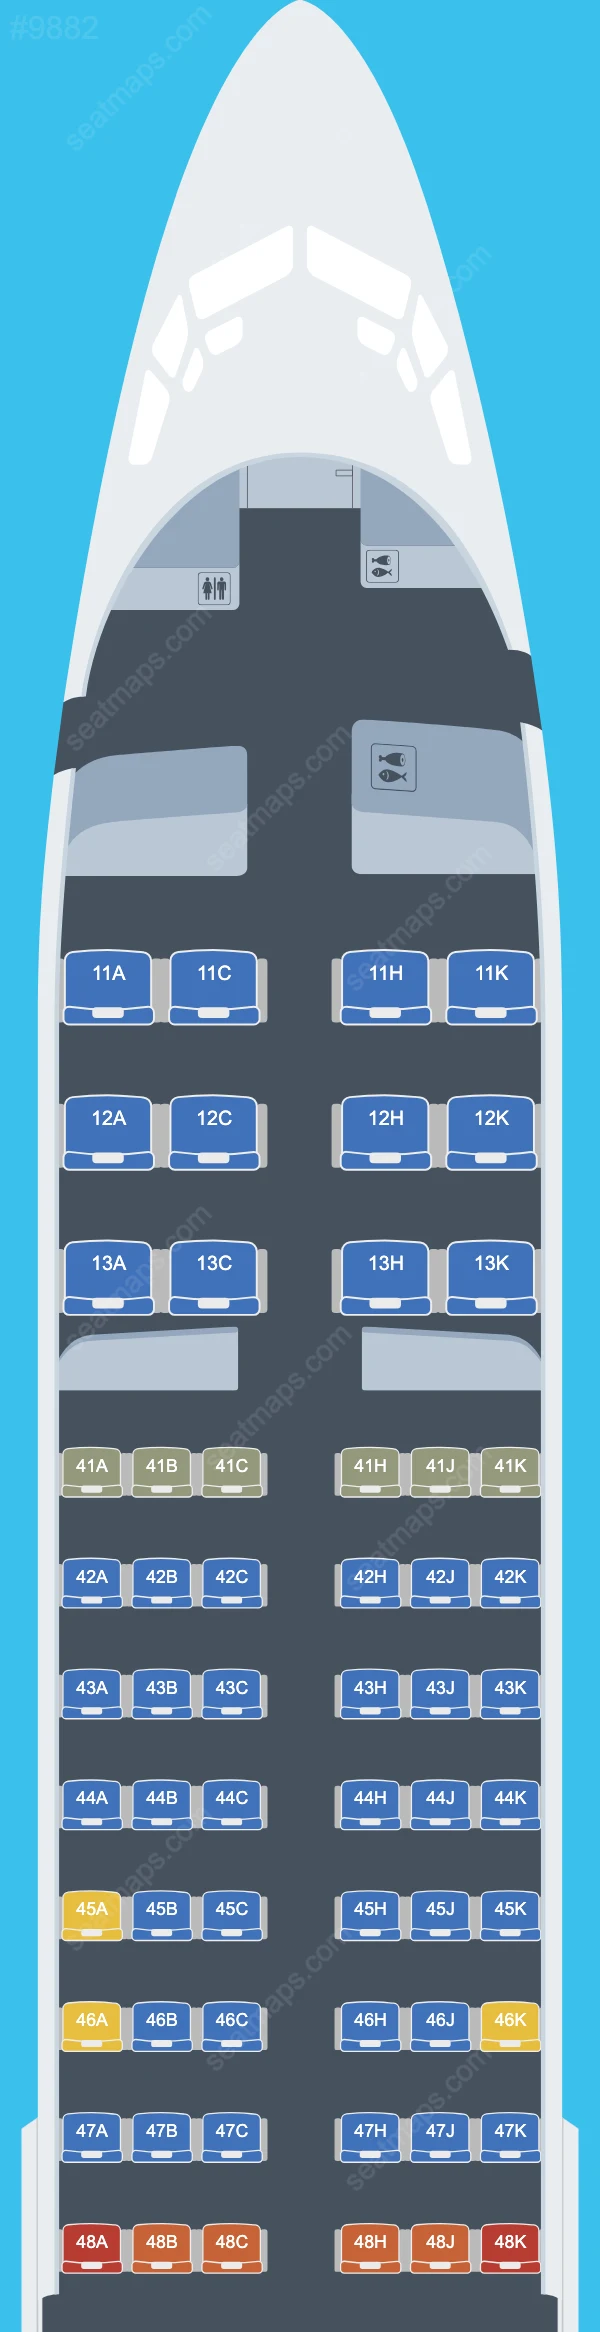 Singapore Airlines Boeing 737-800 seatmap mobile preview